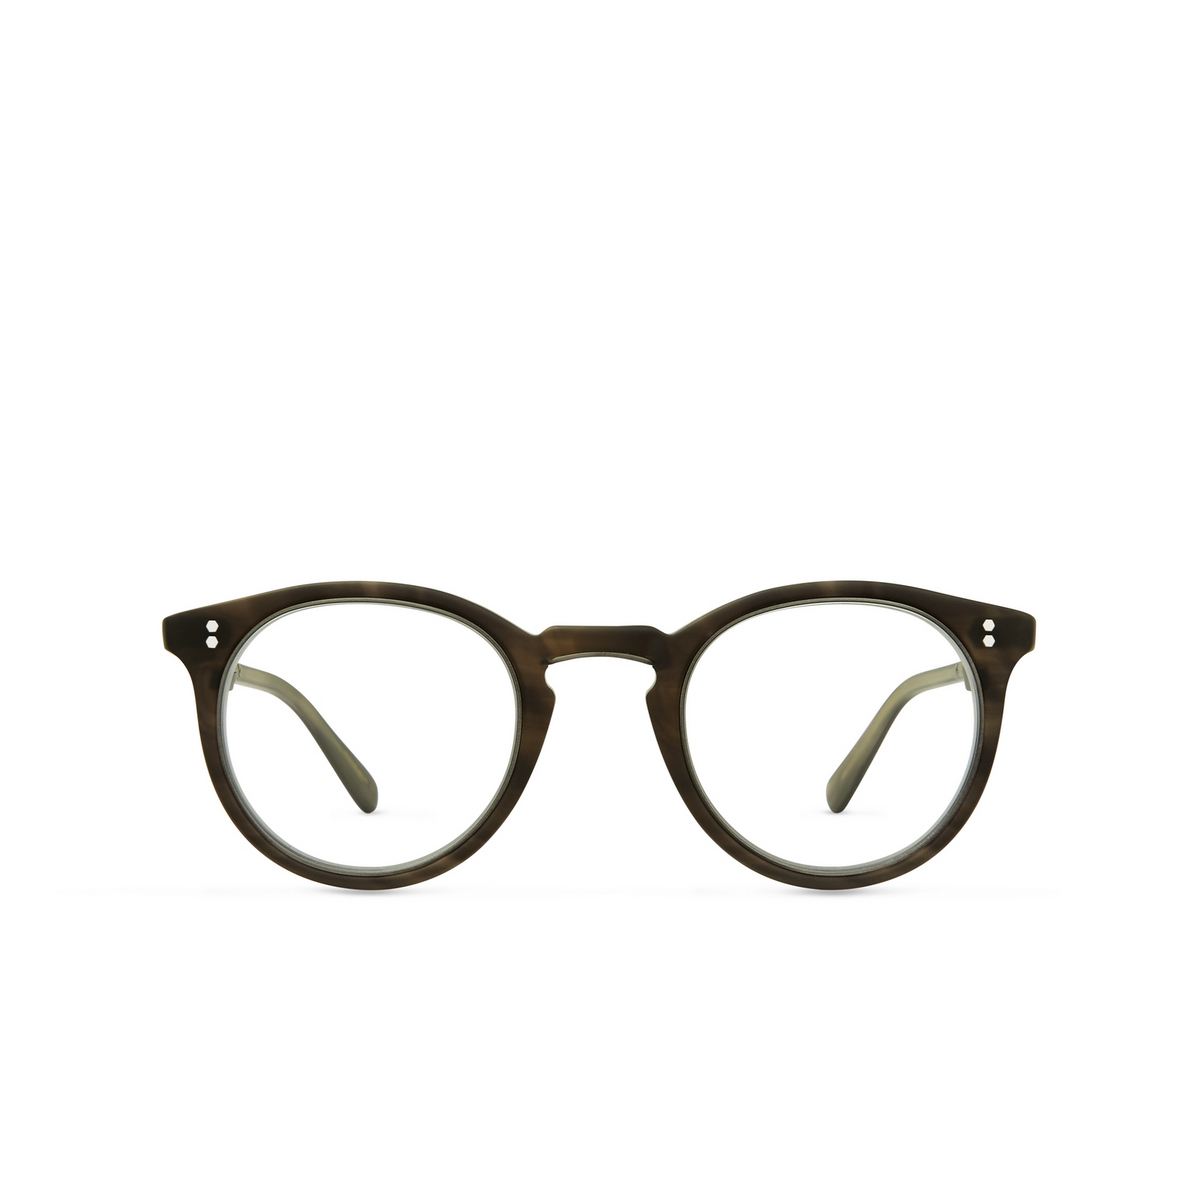 Mr. Leight CROSBY C Eyeglasses MOLA-PW Matte Olive Laminate-Pewter - front view